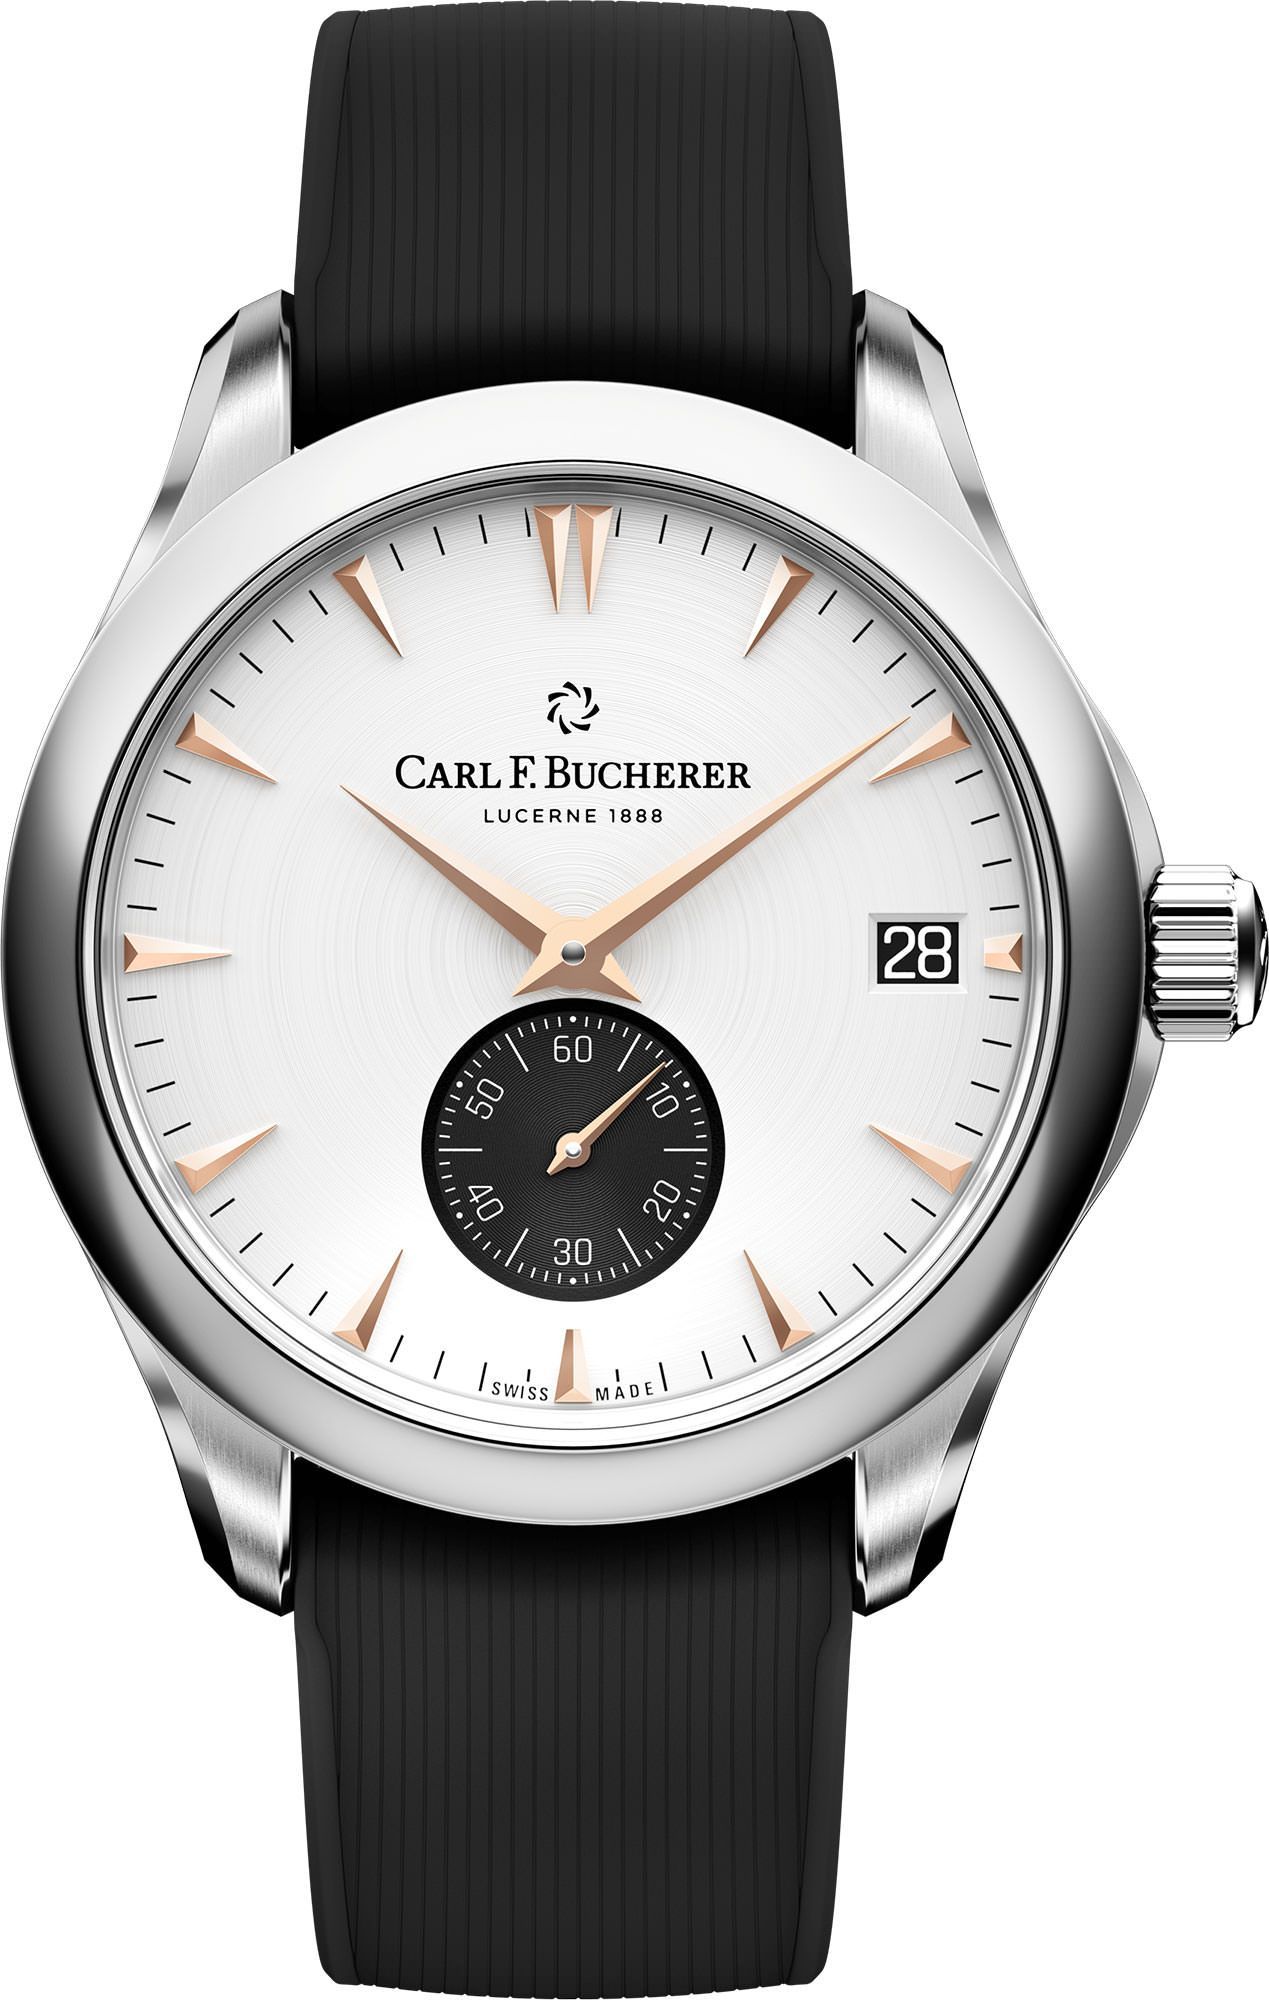 Carl F. Bucherer Manero Peripheral White Dial 40.6 mm Automatic Watch For Men - 1